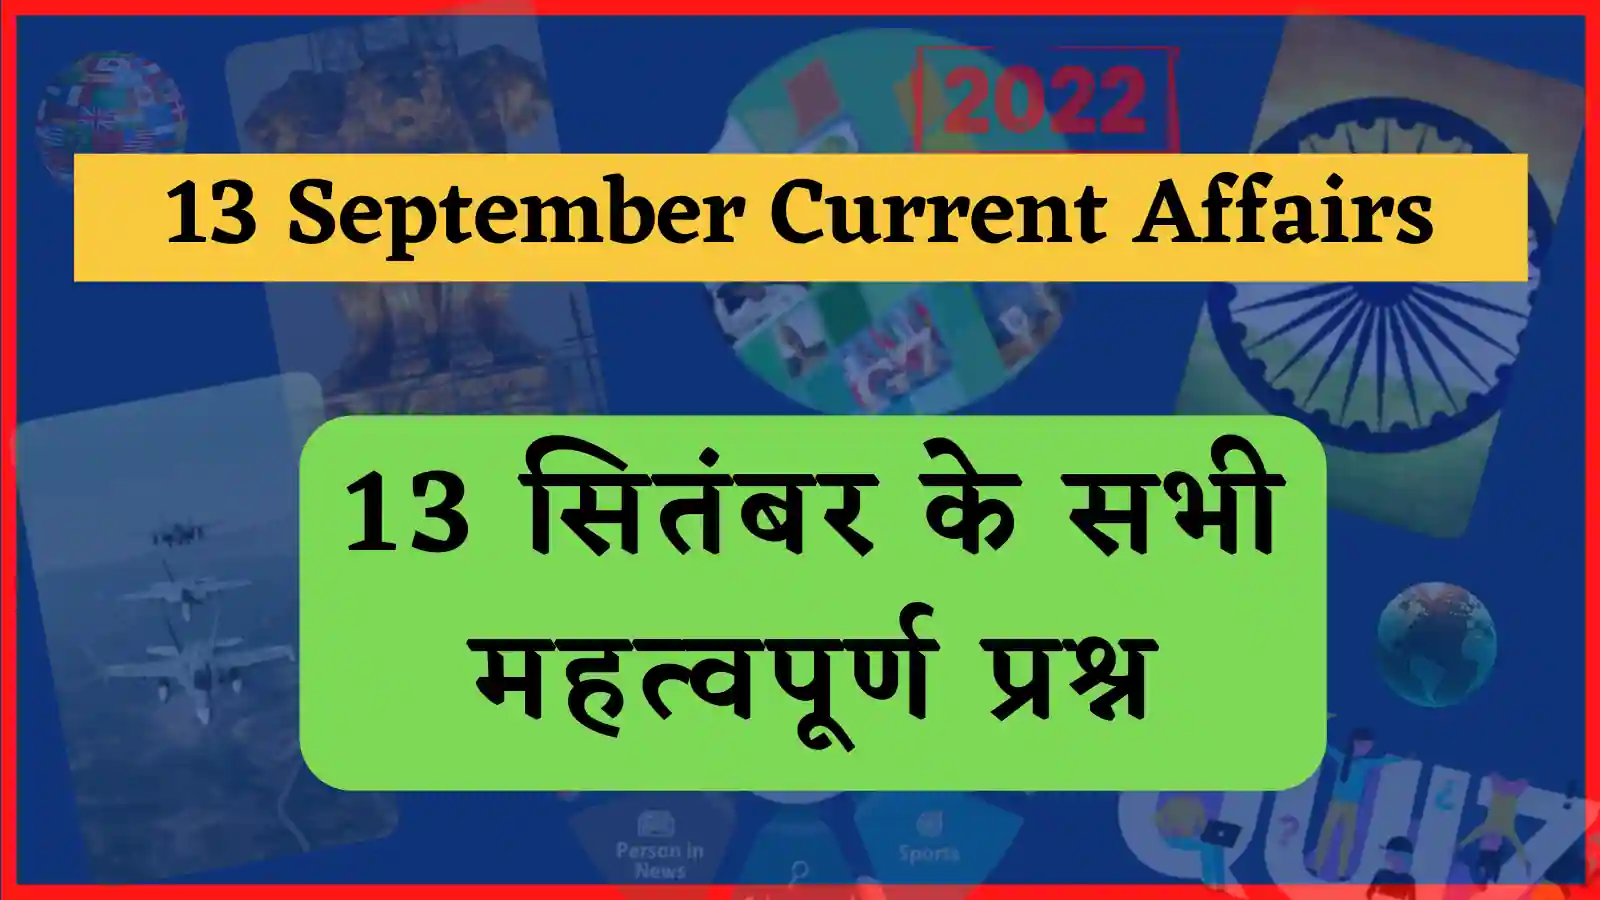 13 September 2022 Current Affairs in Hindi